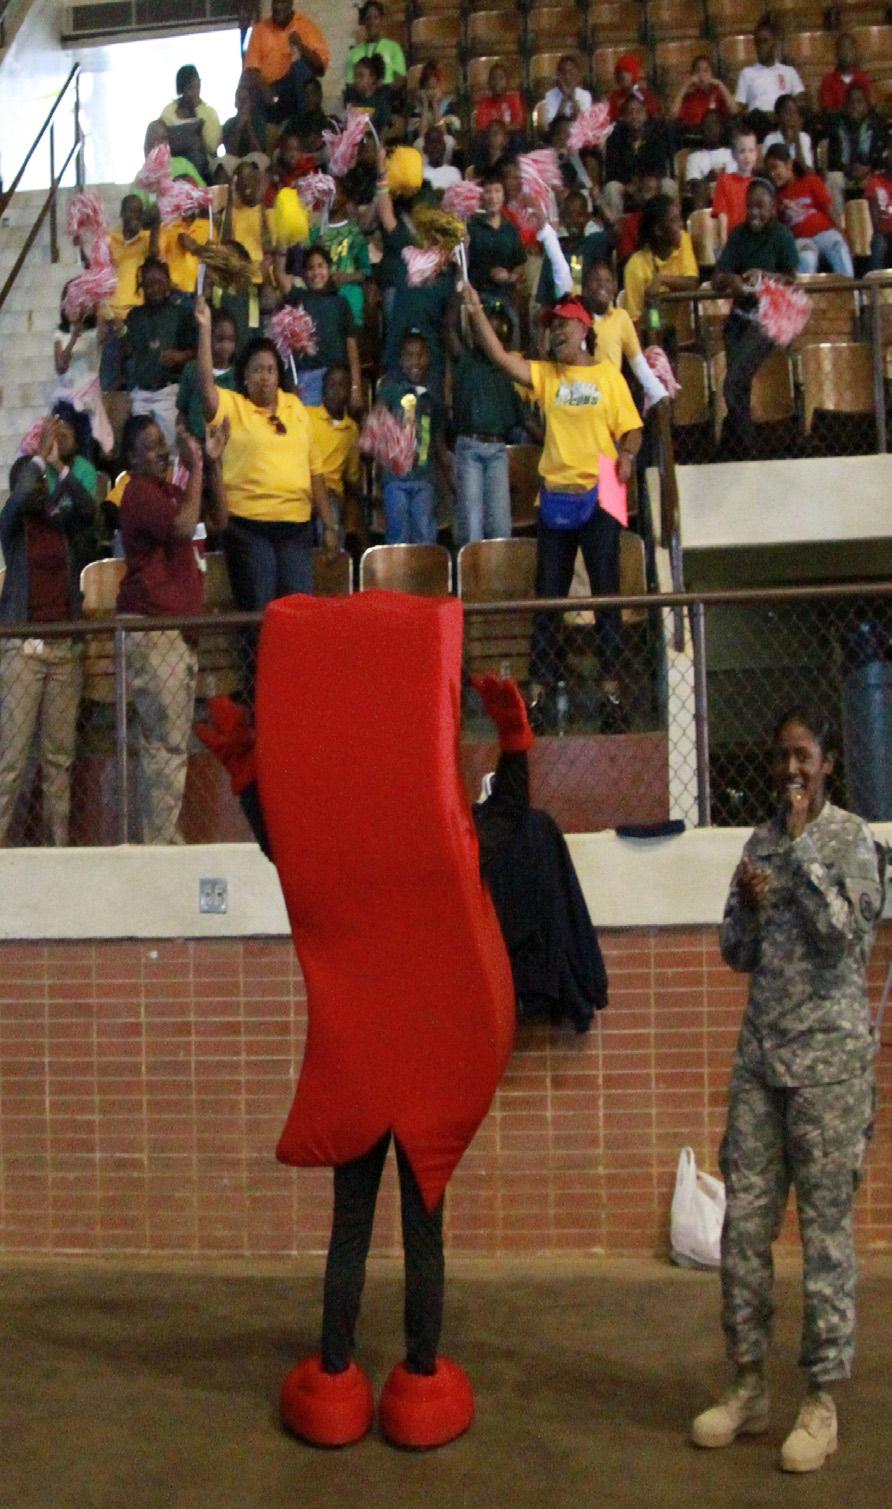 The Drug Demand Reduction (DDR) team from the Alabama National Guard Counterdrug Program helped plan and conduct the event that hosted more than 400 students from the Montgomery Public School System.